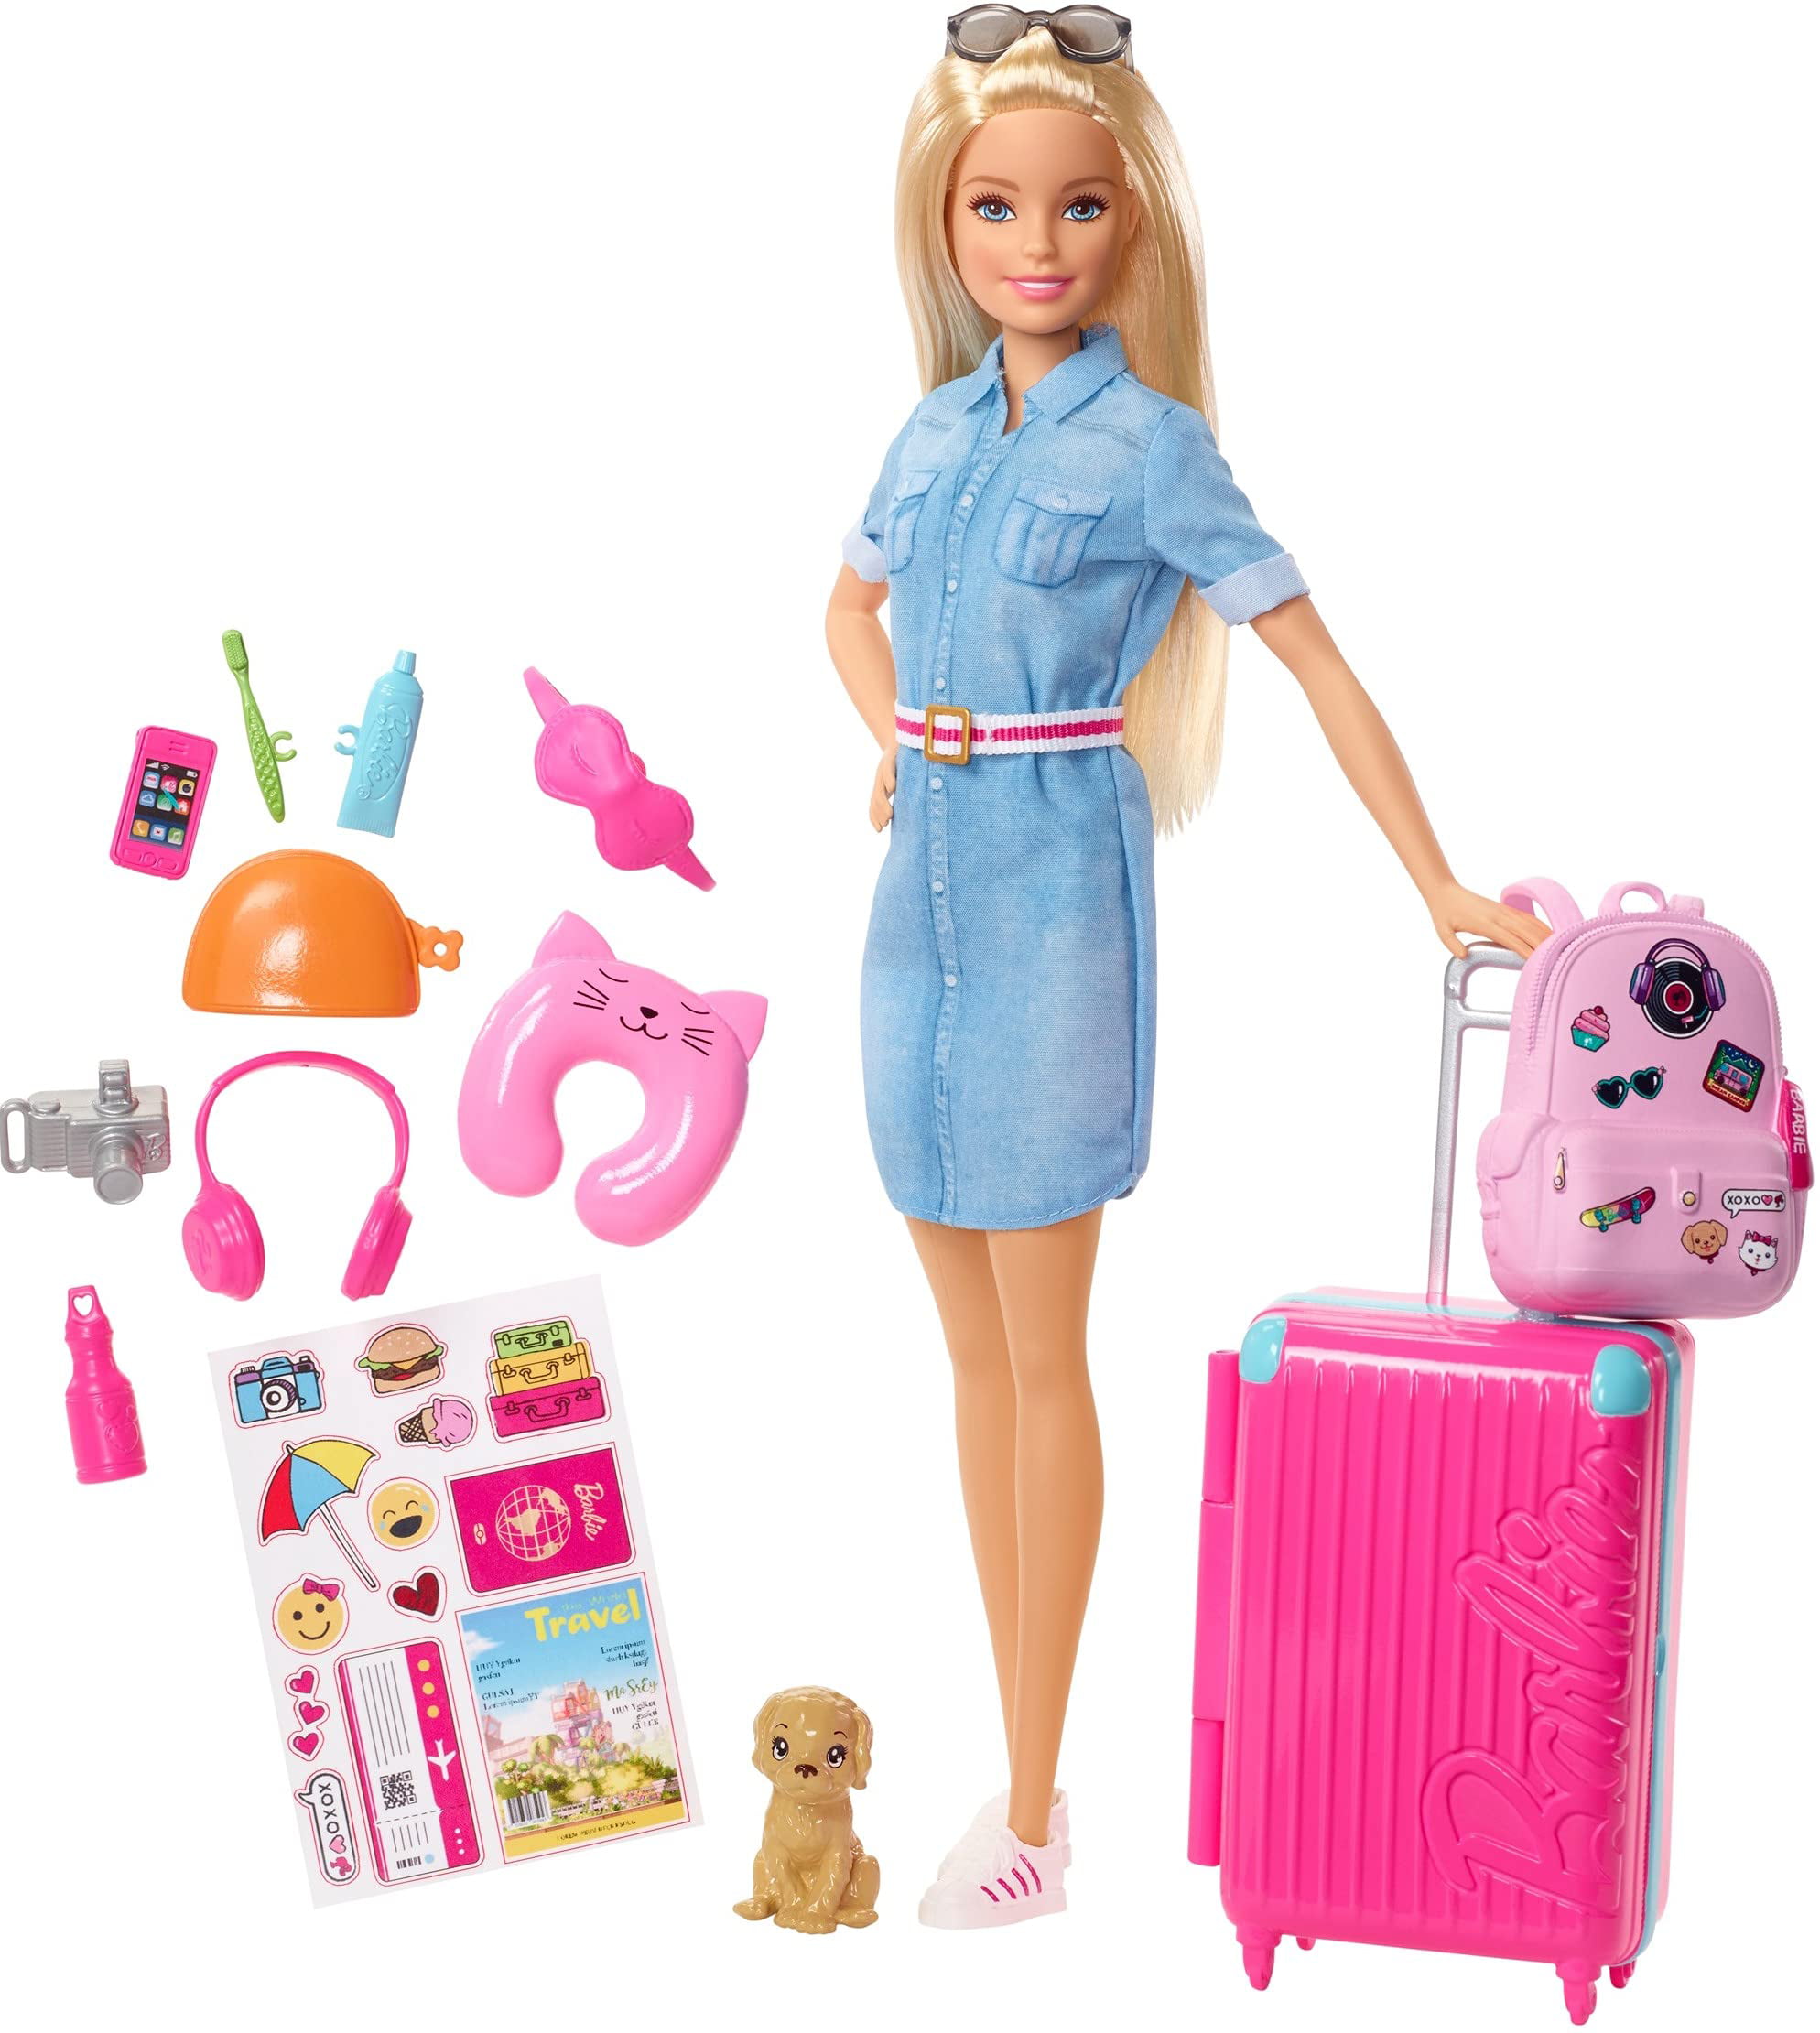 Accessories Barbie Doll and Travel Set with Puppy Multicolour Luggage and 10 